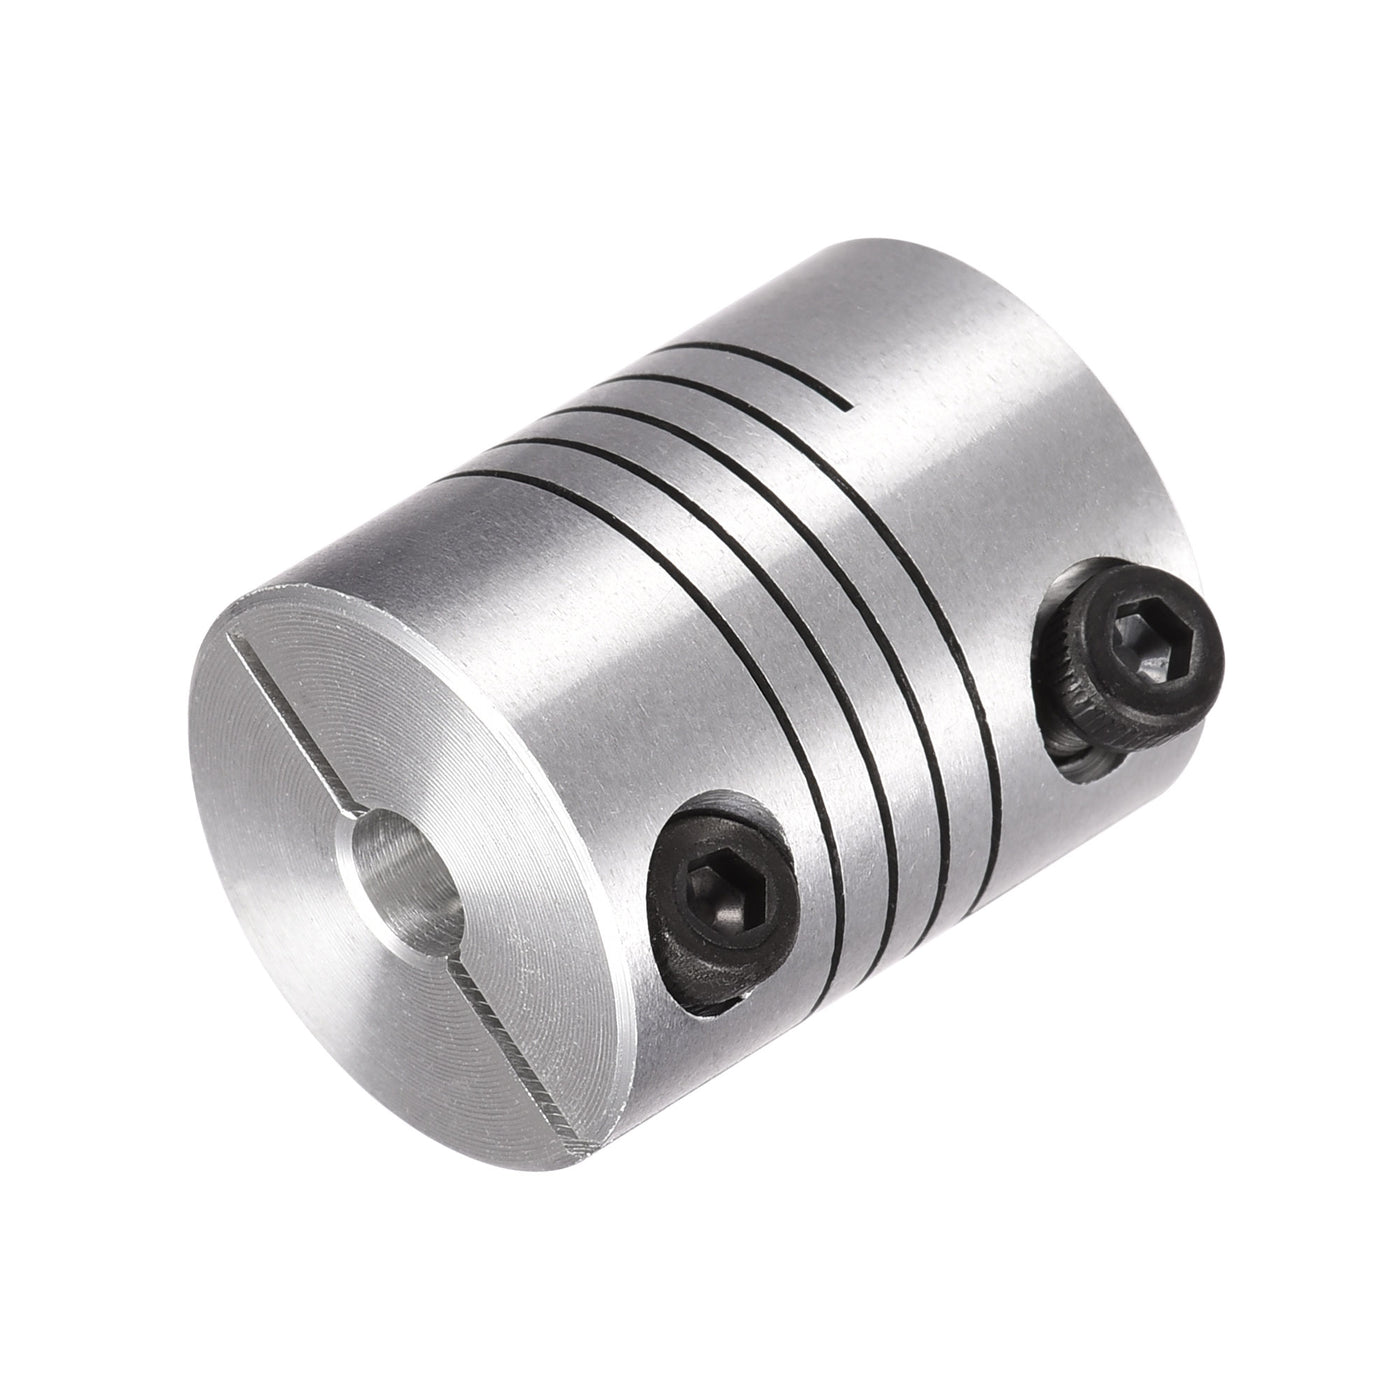 uxcell Uxcell 2PCS Motor Shaft 5mm to 5mm Helical Beam Coupler Coupling 25mm Dia 30mm Length